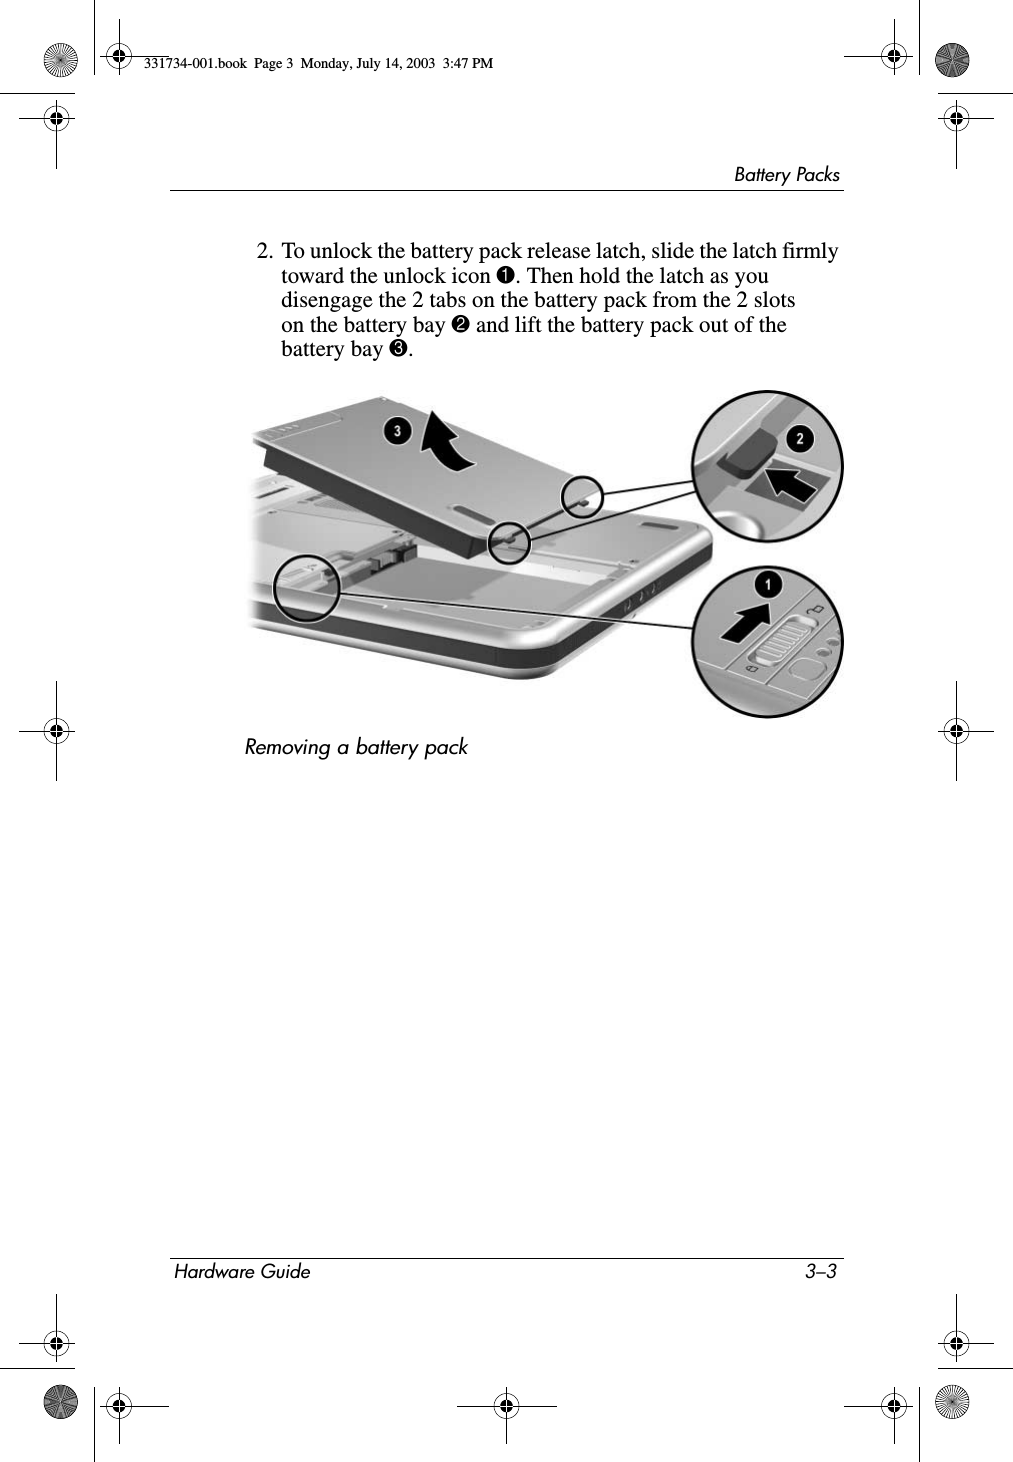 Battery PacksHardware Guide 3–32. To unlock the battery pack release latch, slide the latch firmly toward the unlock icon 1. Then hold the latch as you disengage the 2 tabs on the battery pack from the 2 slots on the battery bay 2 and lift the battery pack out of the battery bay 3.Removing a battery pack331734-001.book  Page 3  Monday, July 14, 2003  3:47 PM